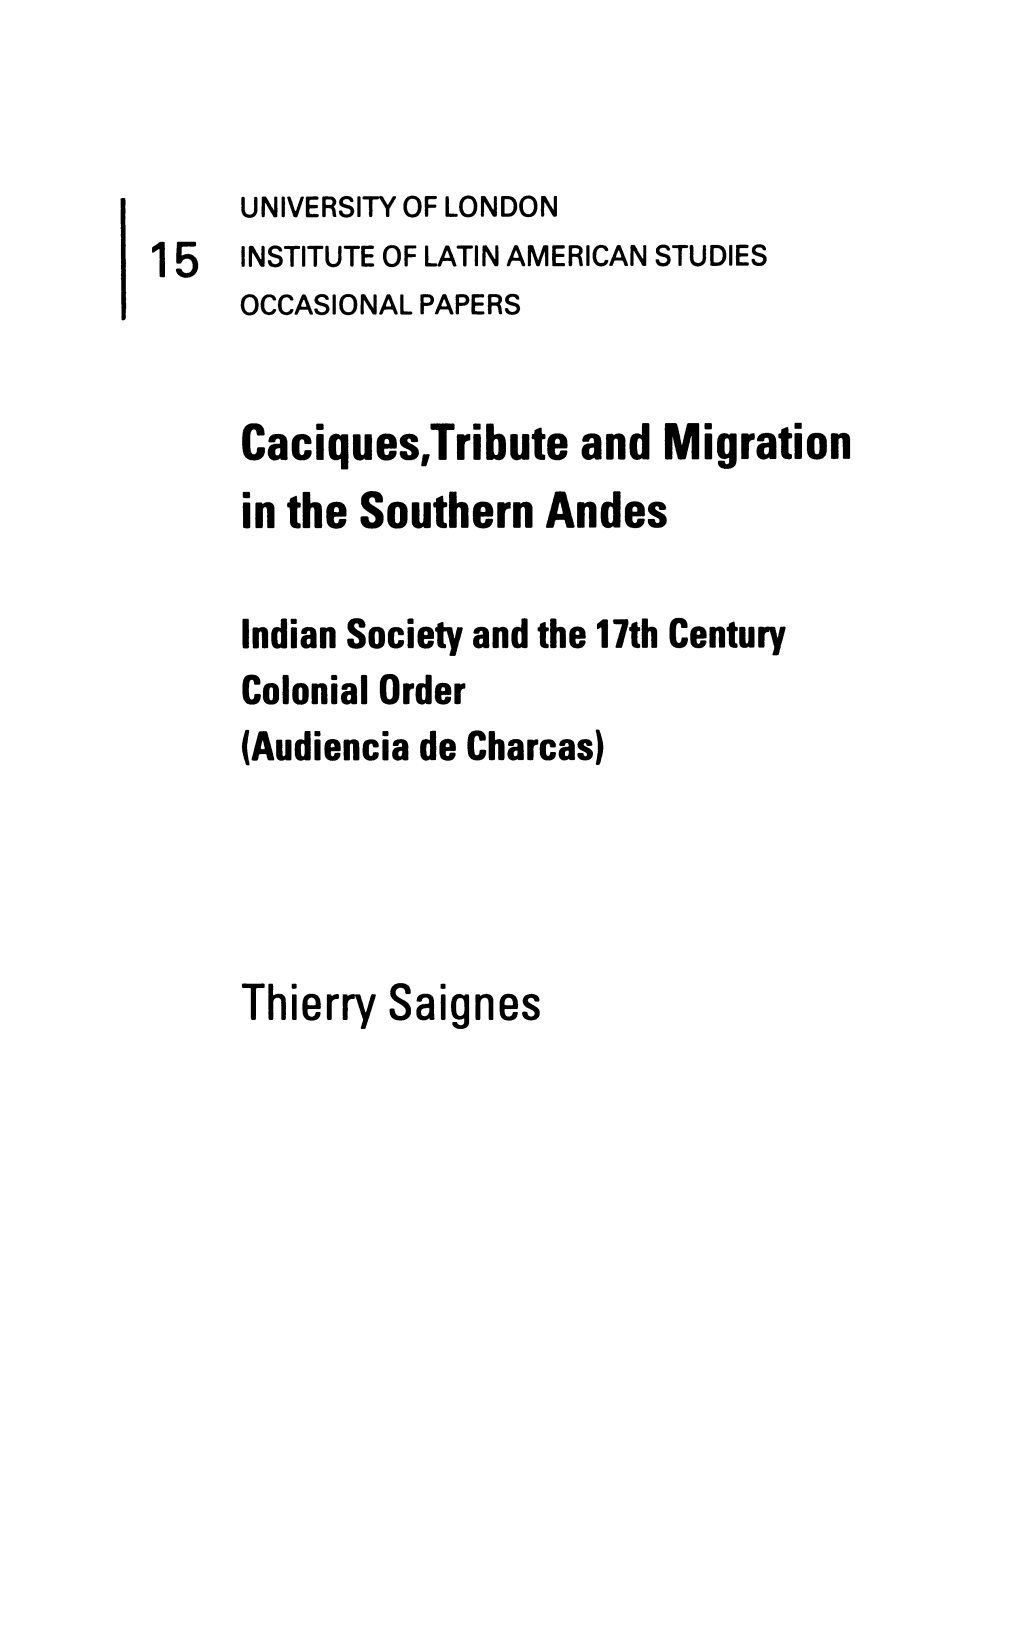 Caciques, Tribute and Migration in the Southern Andes Thierry Saignes